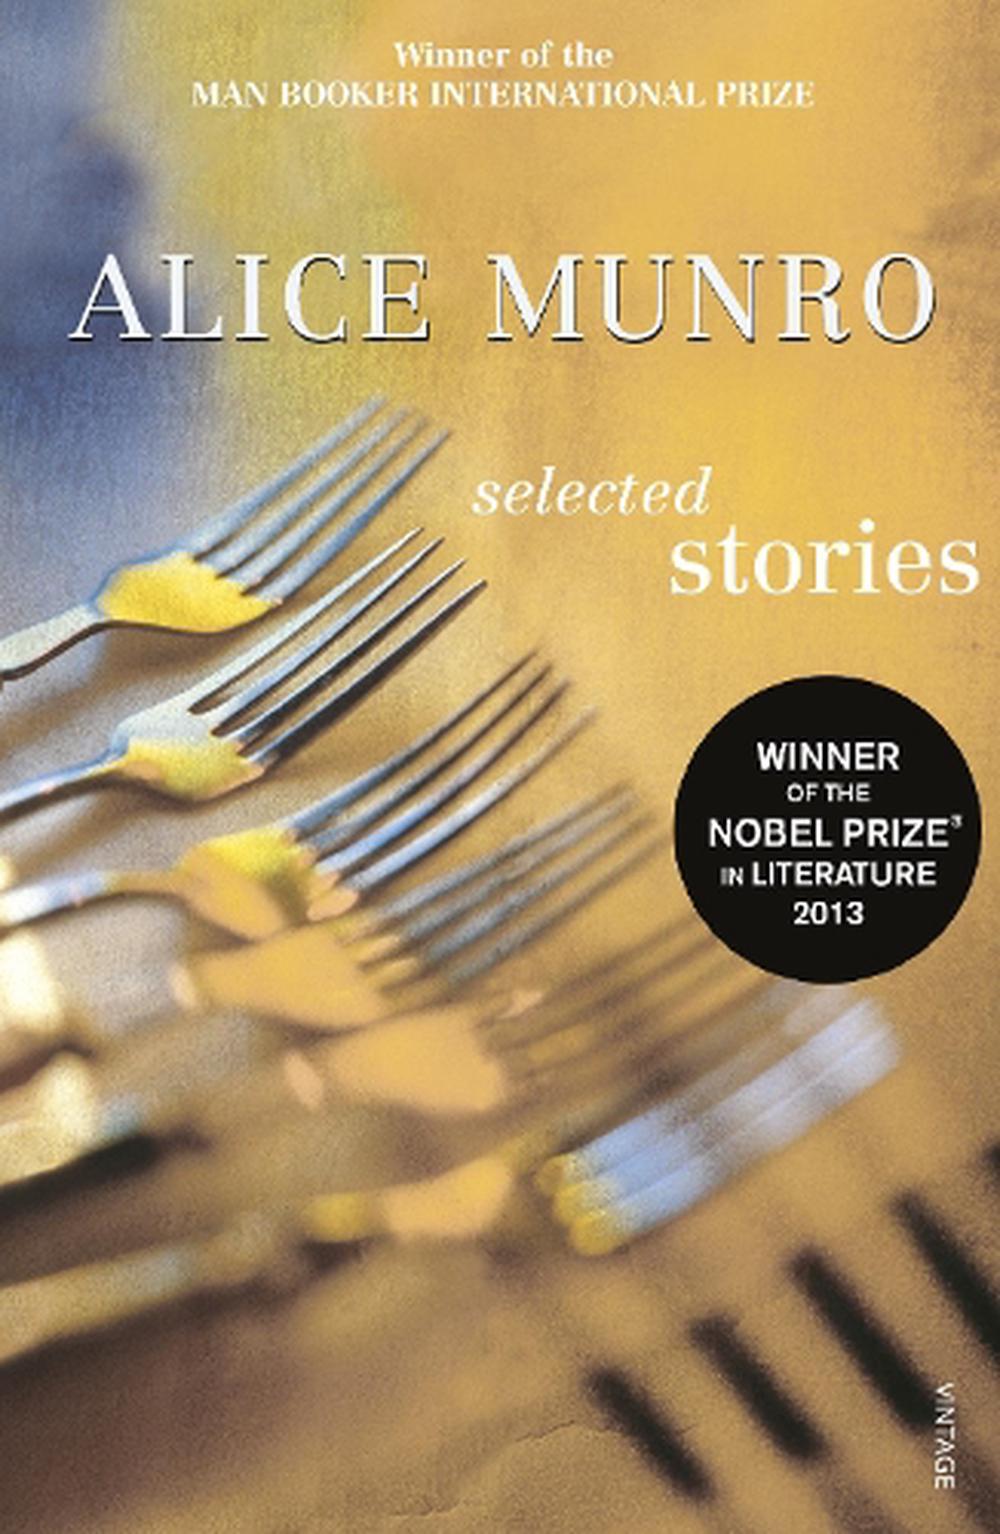 alice munro selected stories review